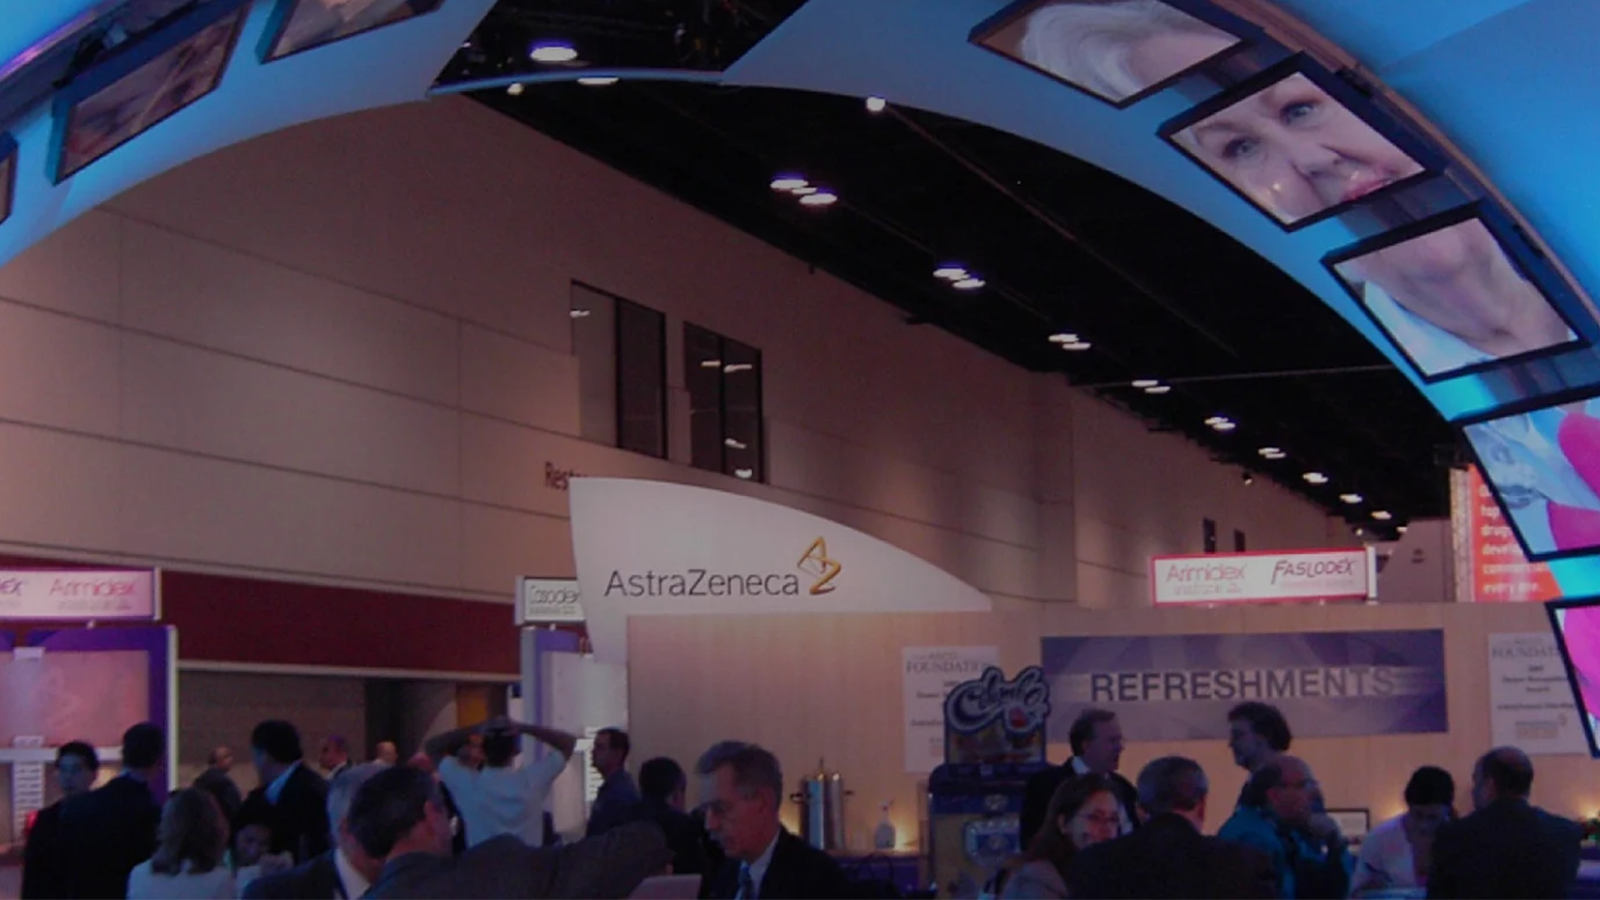 an image of a tradeshow. there are many people around and there is a large blue arch